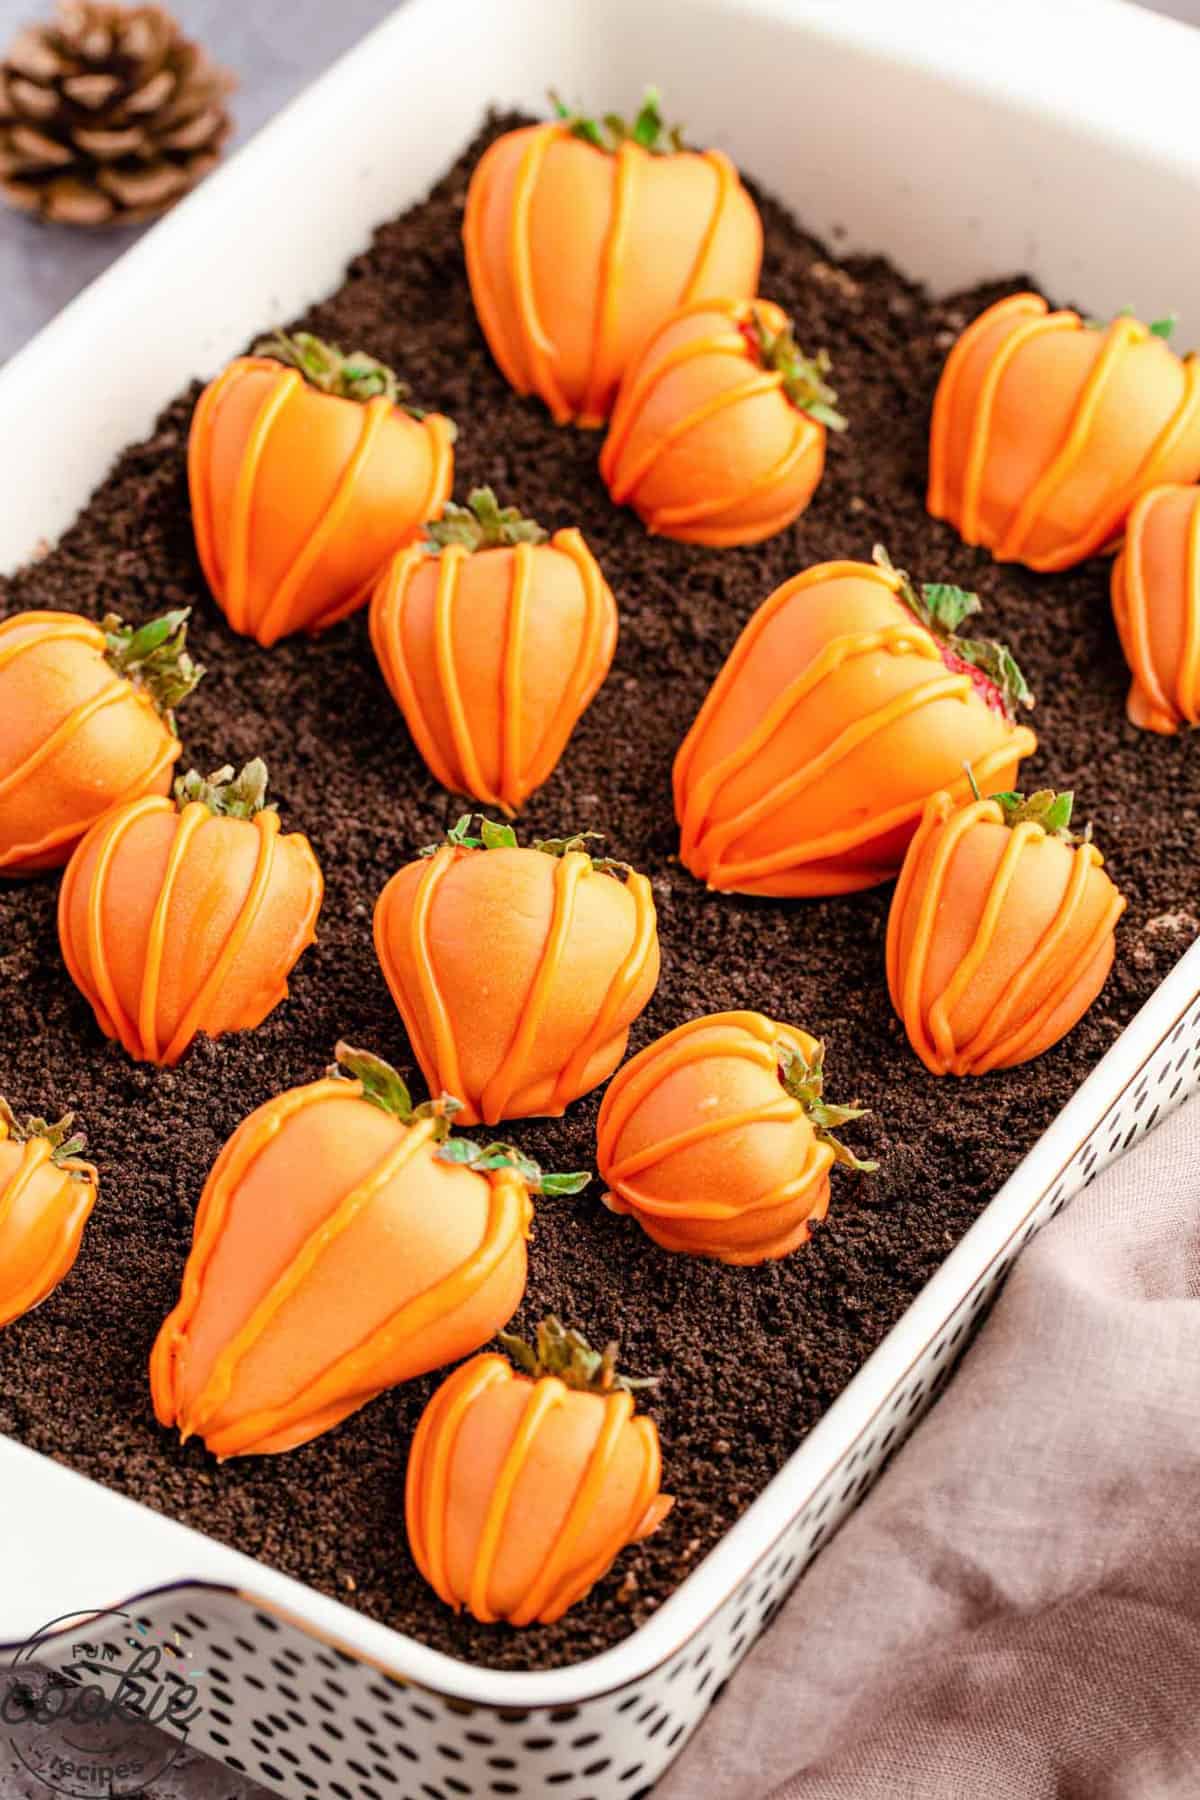 brownies with orange candy coated strawberries decorated to look like pumpkins